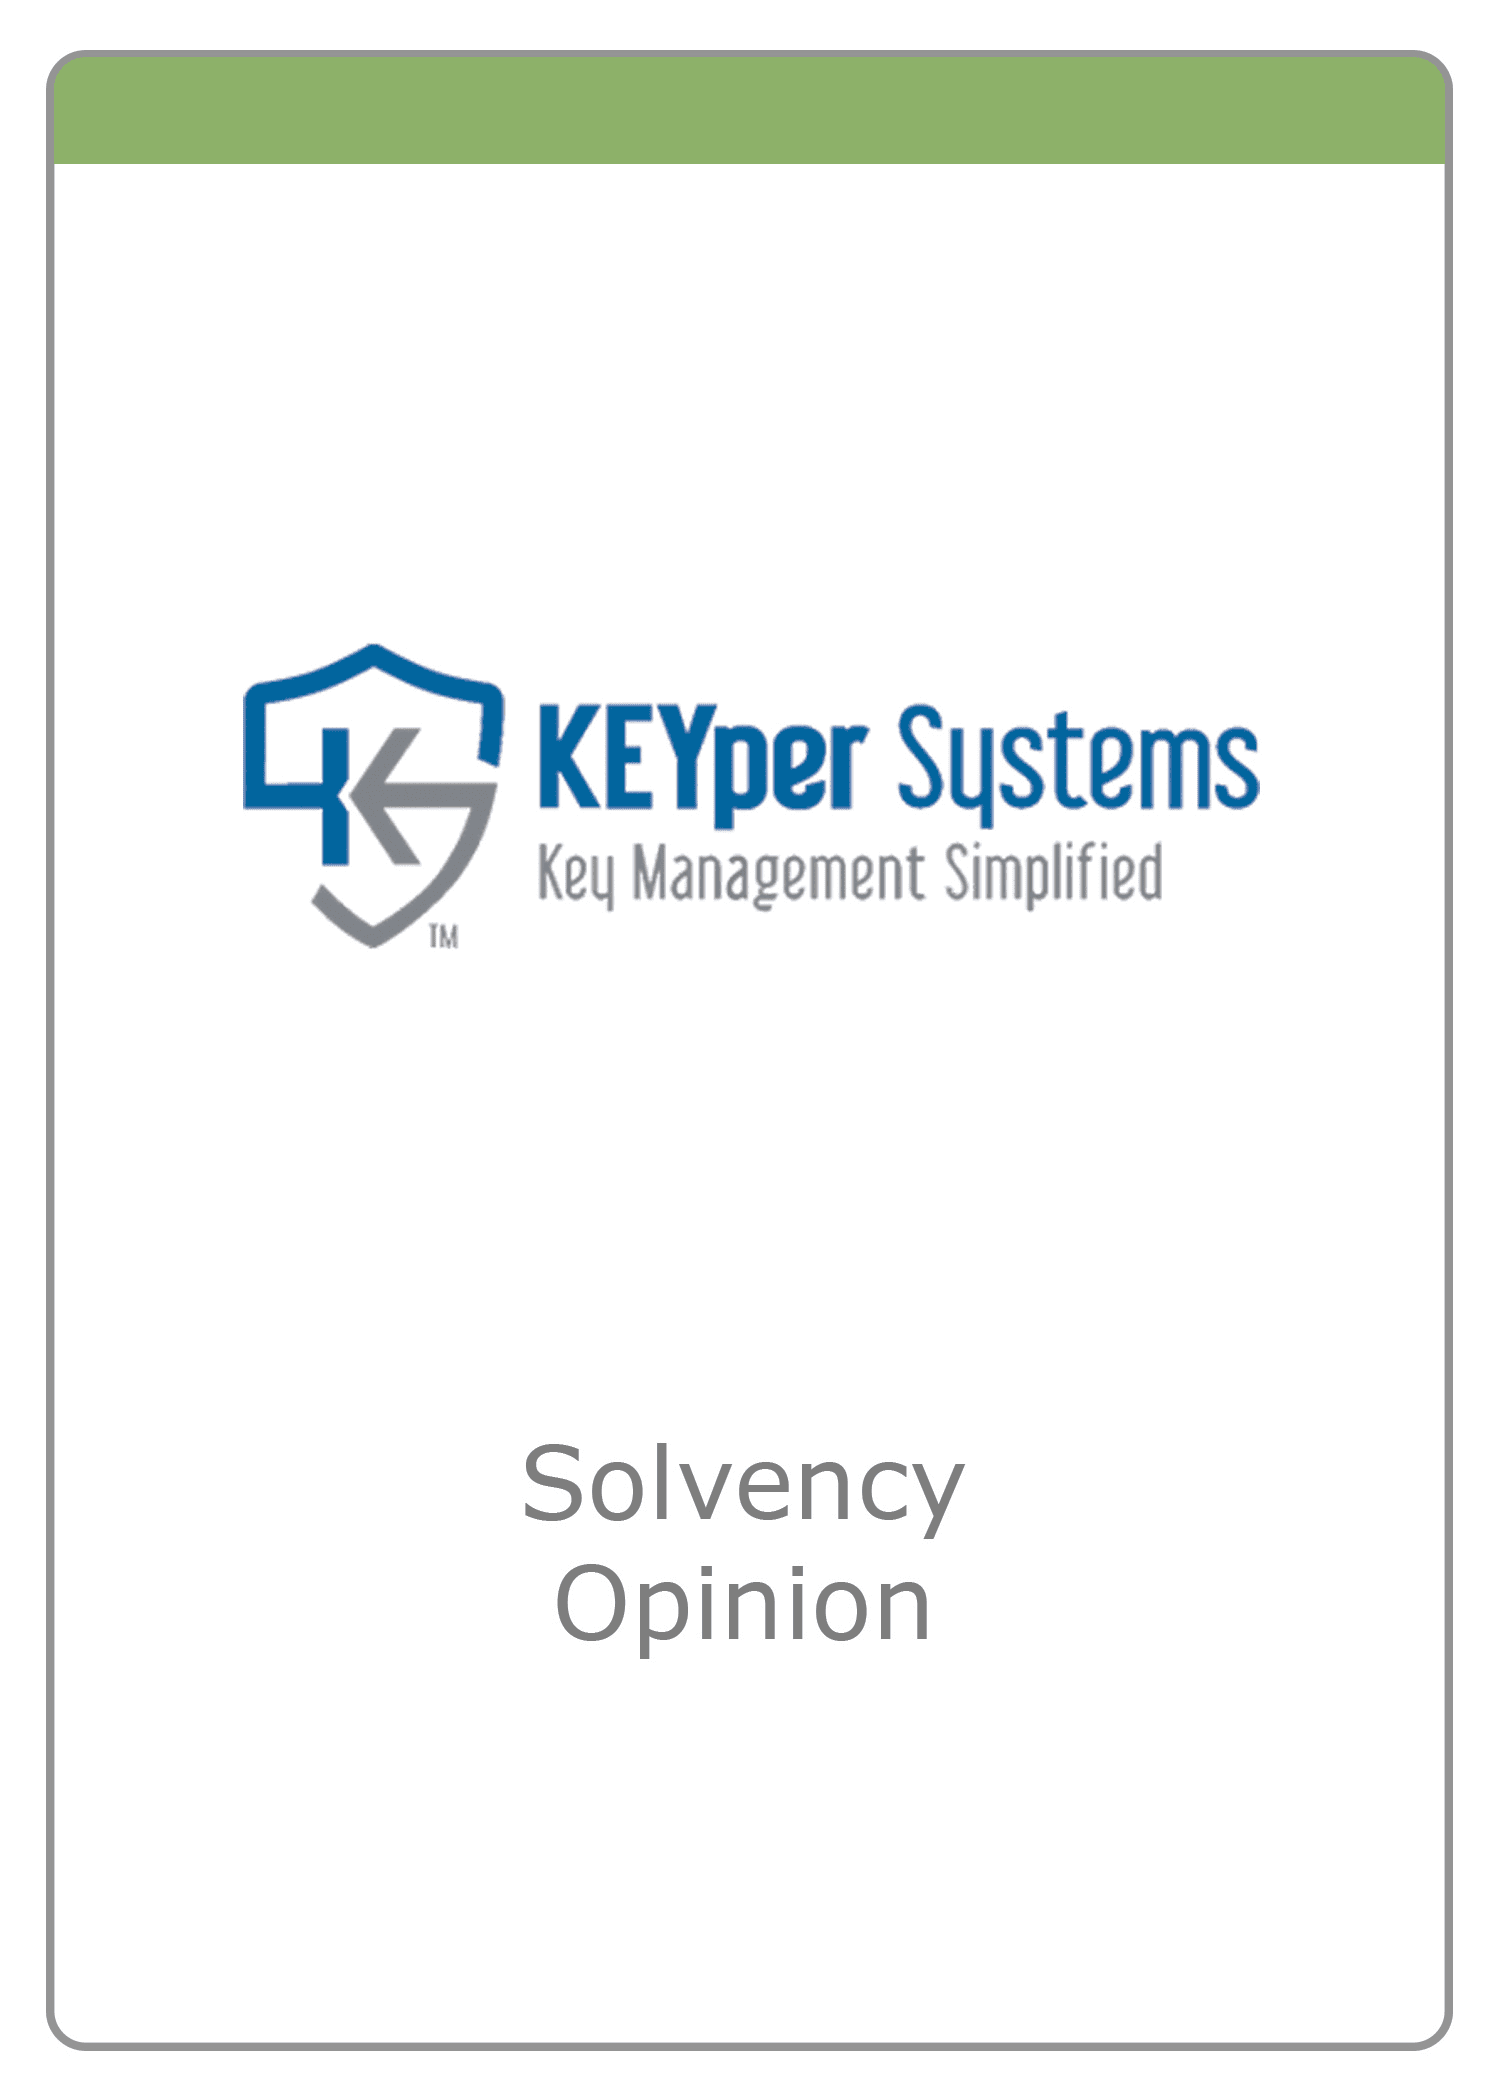 KEYper Systems - Transaction Opinions - The McLean Group